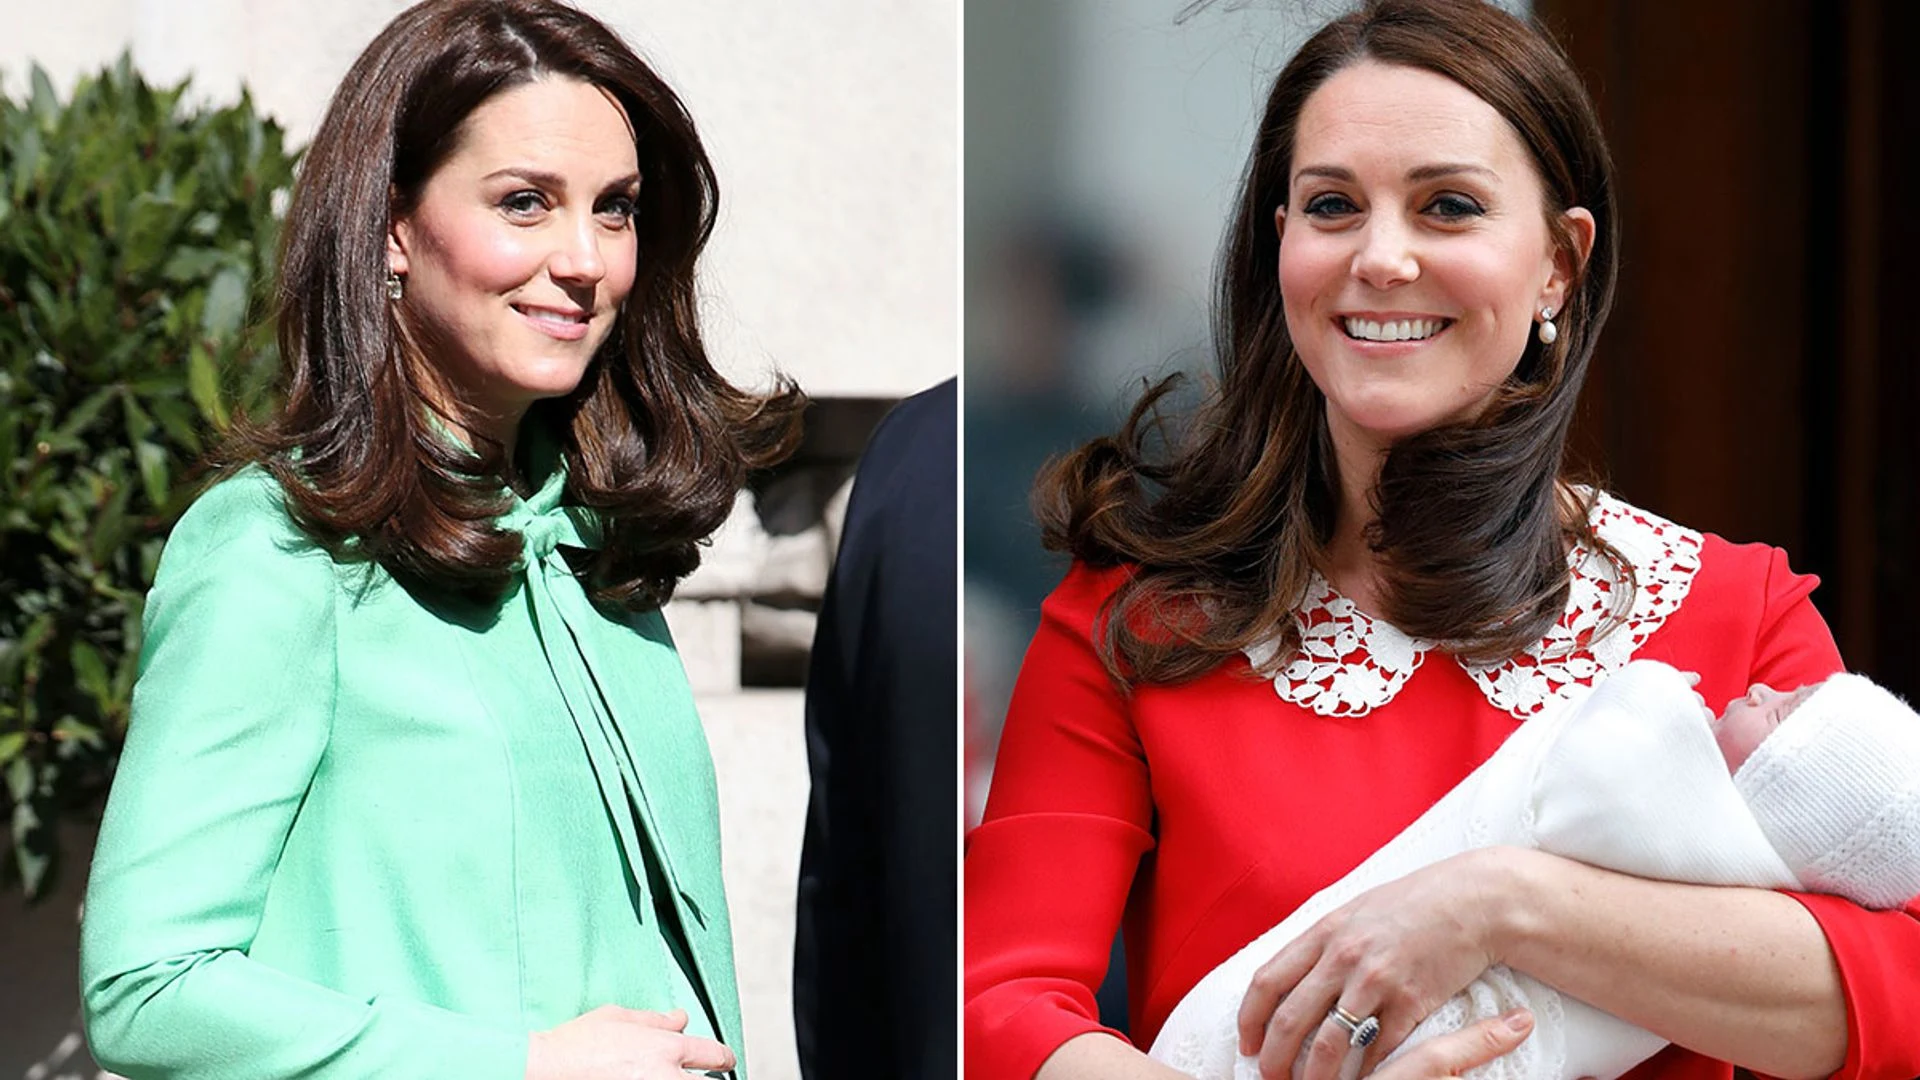 Kate Middleton's Brave Recovery Journey: Family, Privacy, and the Royal Spotlight